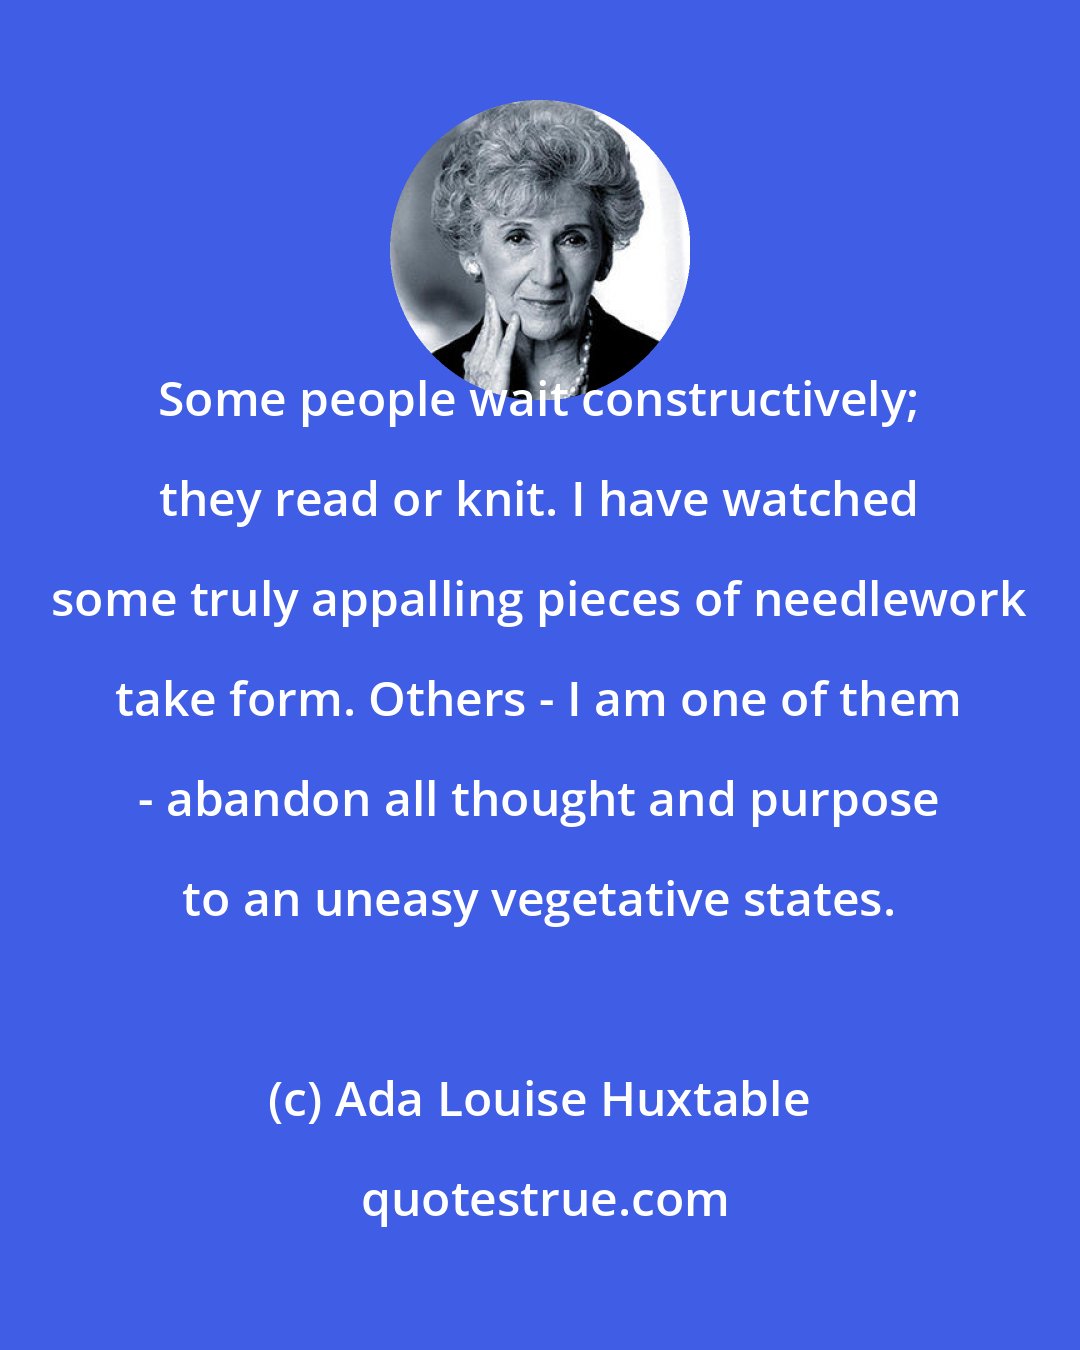 Ada Louise Huxtable: Some people wait constructively; they read or knit. I have watched some truly appalling pieces of needlework take form. Others - I am one of them - abandon all thought and purpose to an uneasy vegetative states.